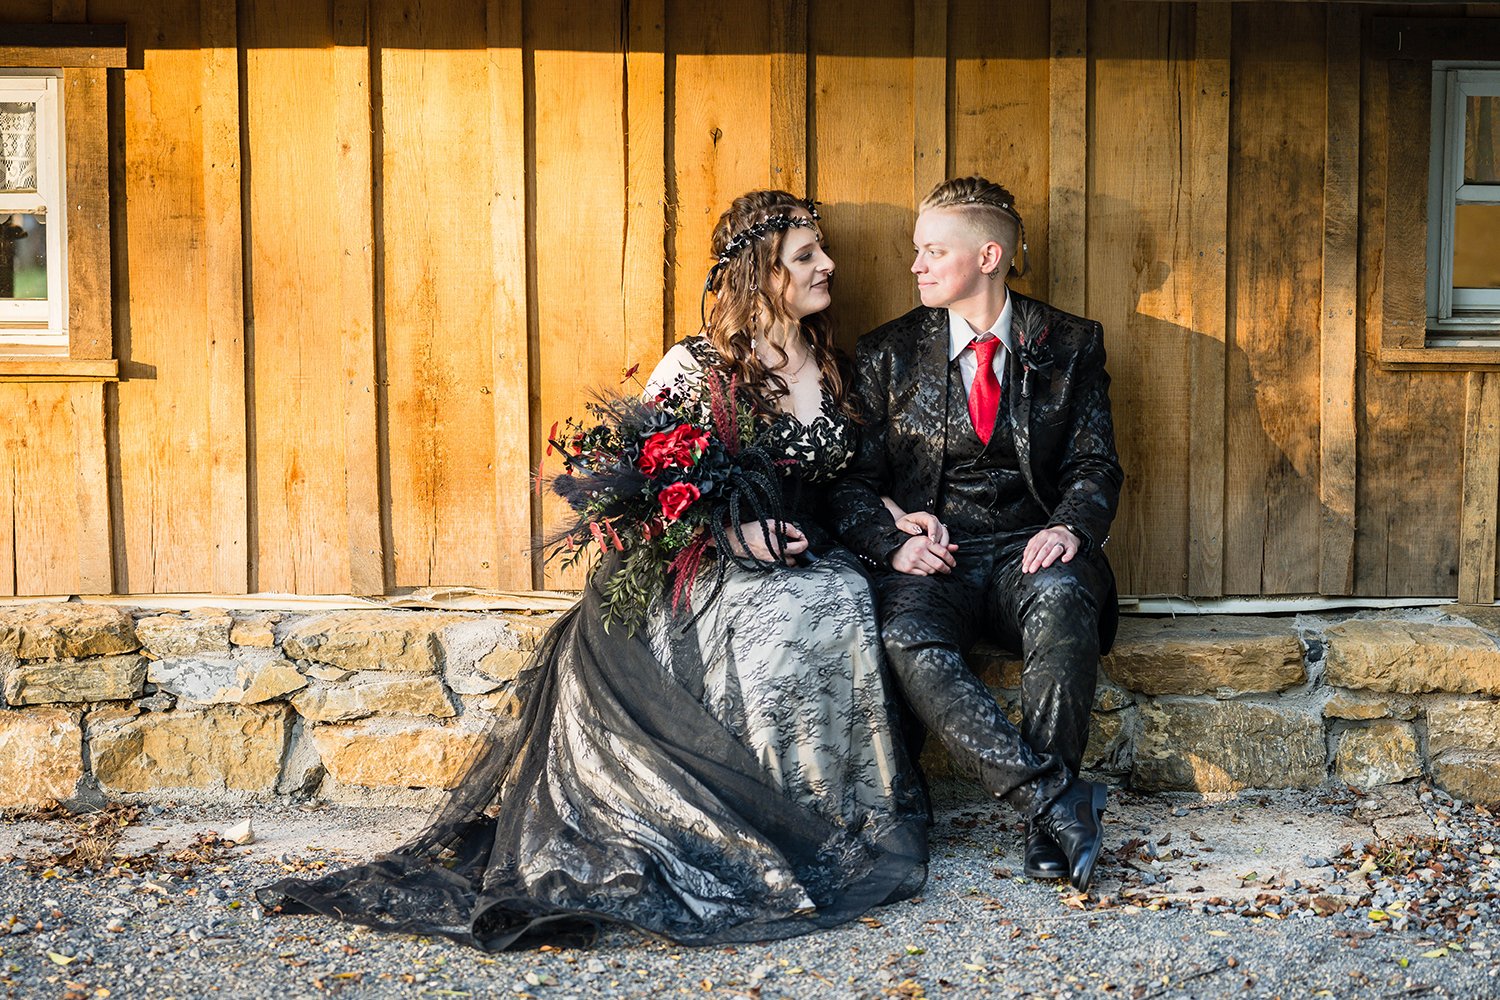 An LGBTQ+ couple sits against a ledge on the side of their Airbnb. The couple angles in towards one another and look contently at one another at the conclusion of their elopement day.